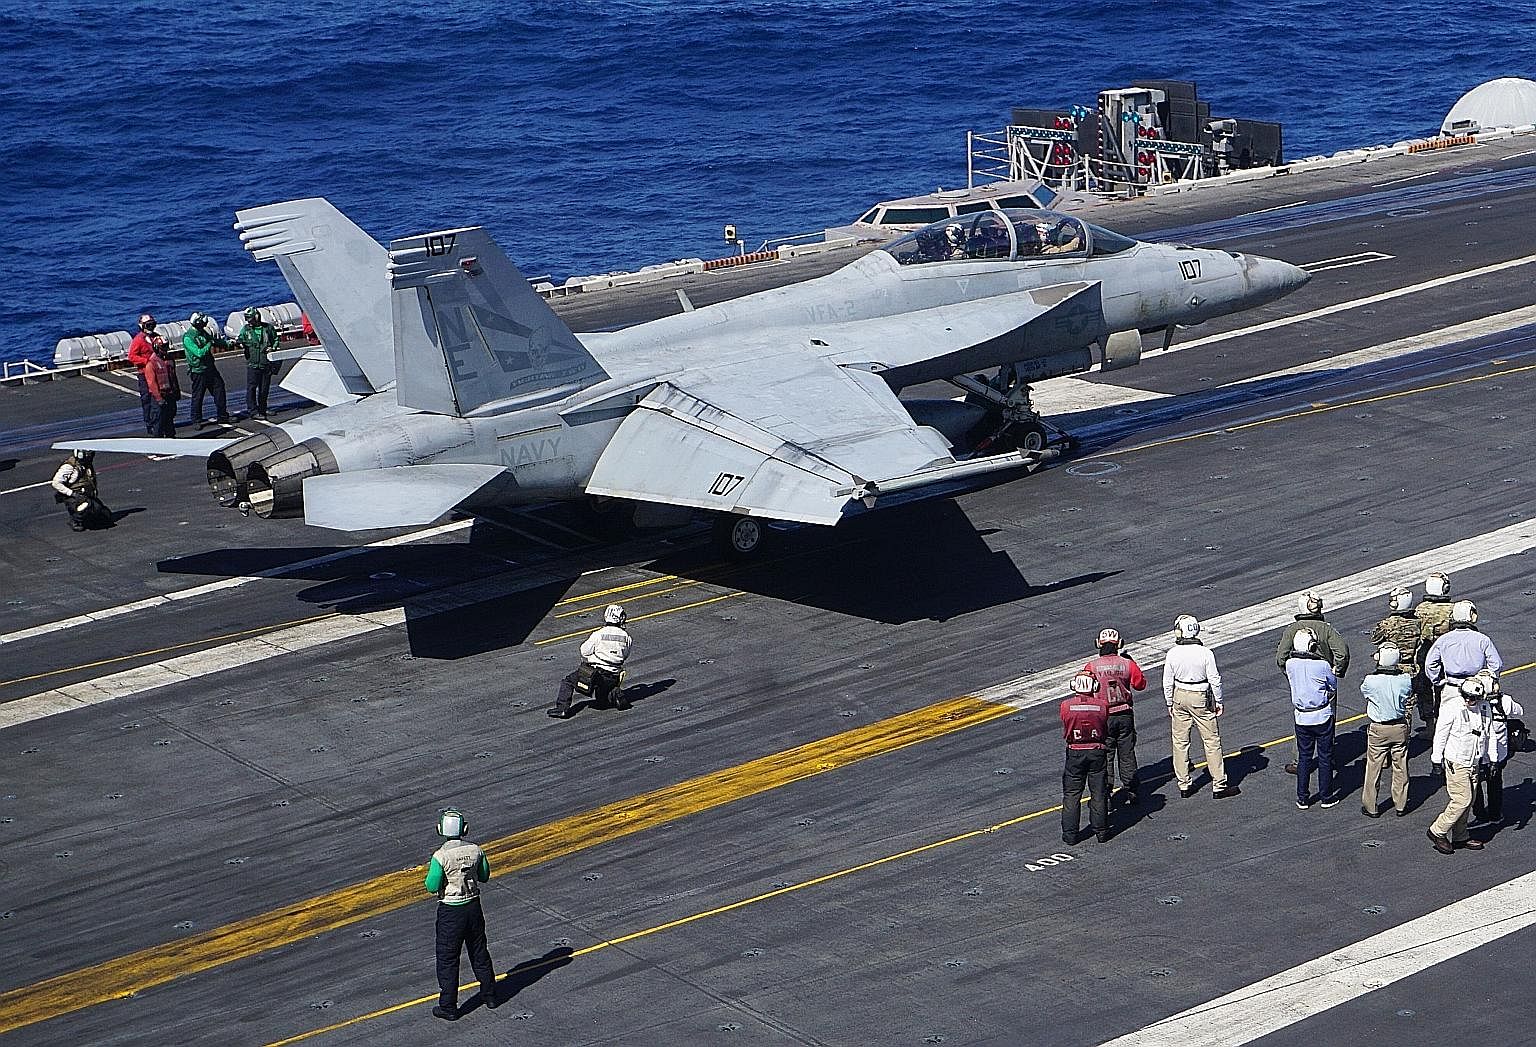 An F-18 Hornet fighter jet set for take-off from the flight deck of aircraft carrier USS Carl Vinson during a routine deployment in the South China Sea this month. The writer believes that while the US still has an overall military advantage over Chi